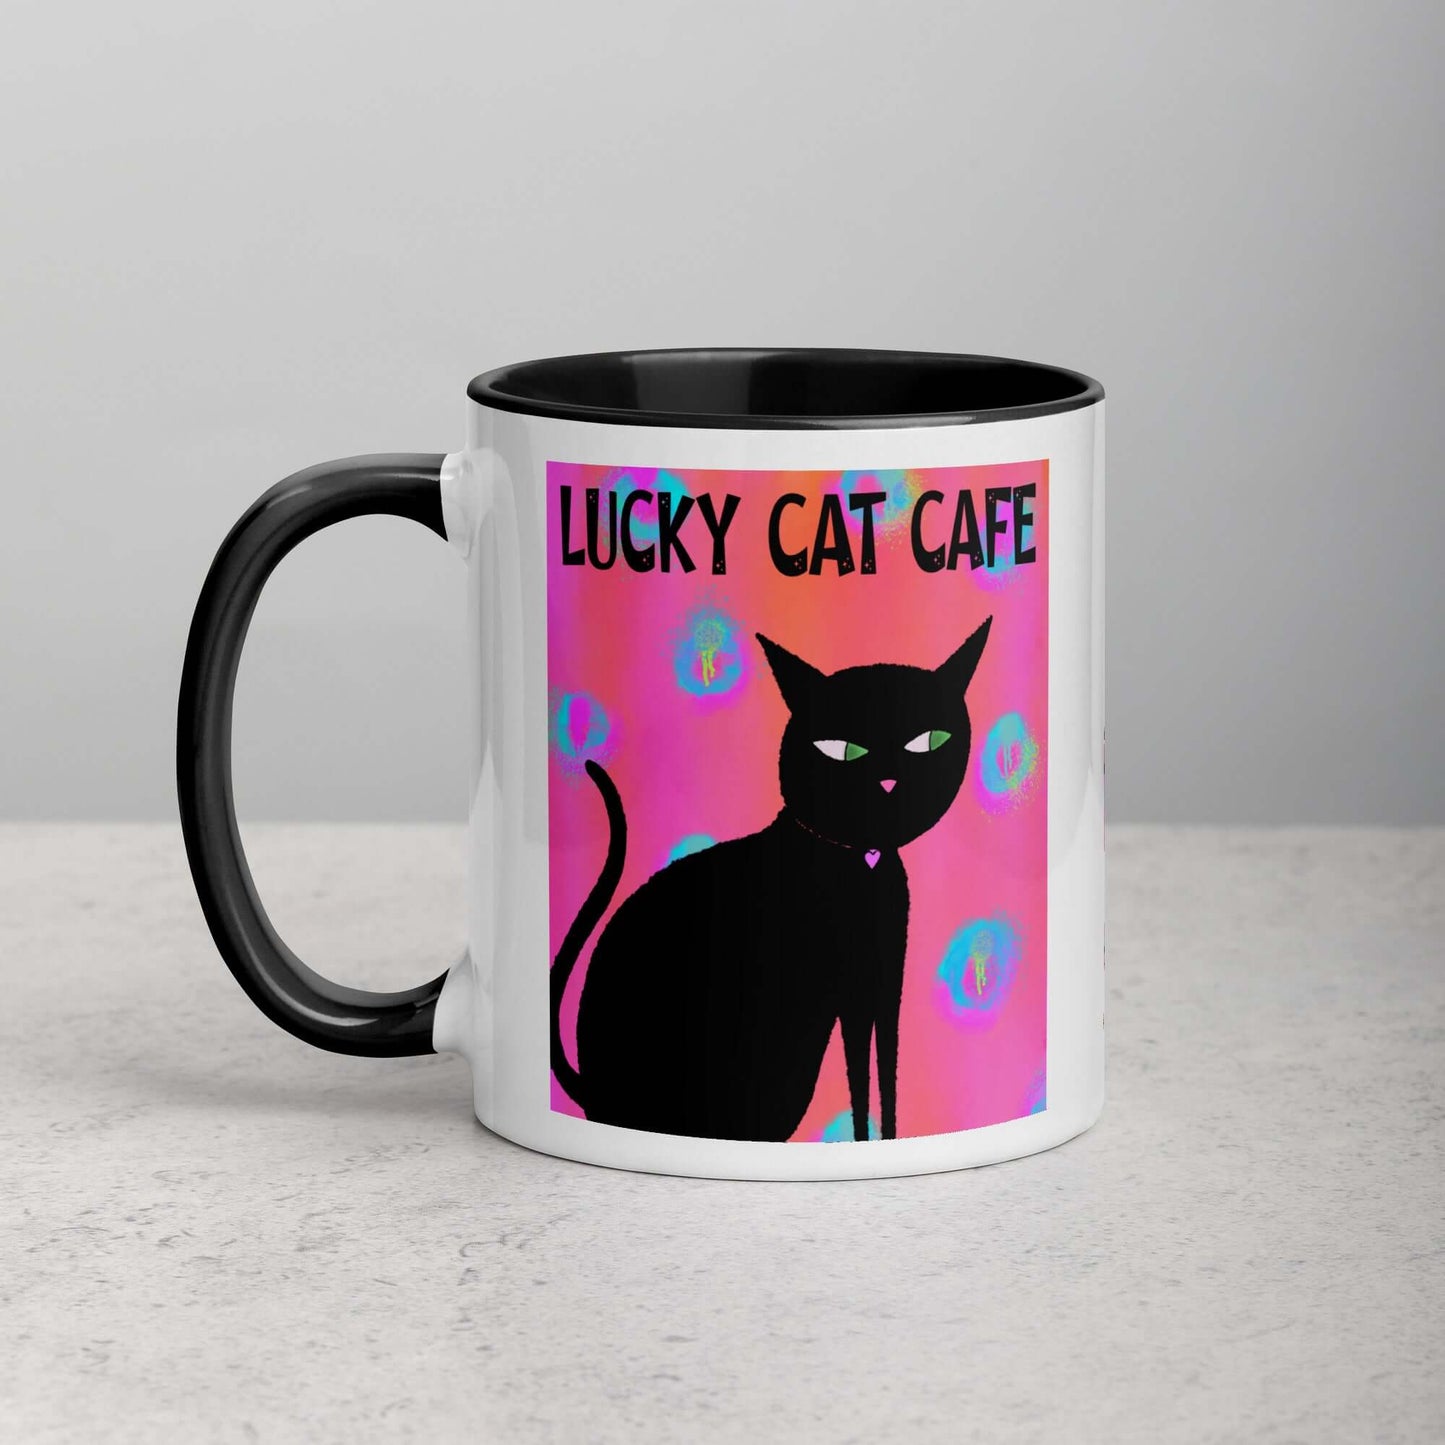 Black Cat on Hot Pink Tie Dye Background with Text “Lucky Cat Cafe” Mug with Black Color Inside Left Handed Front View